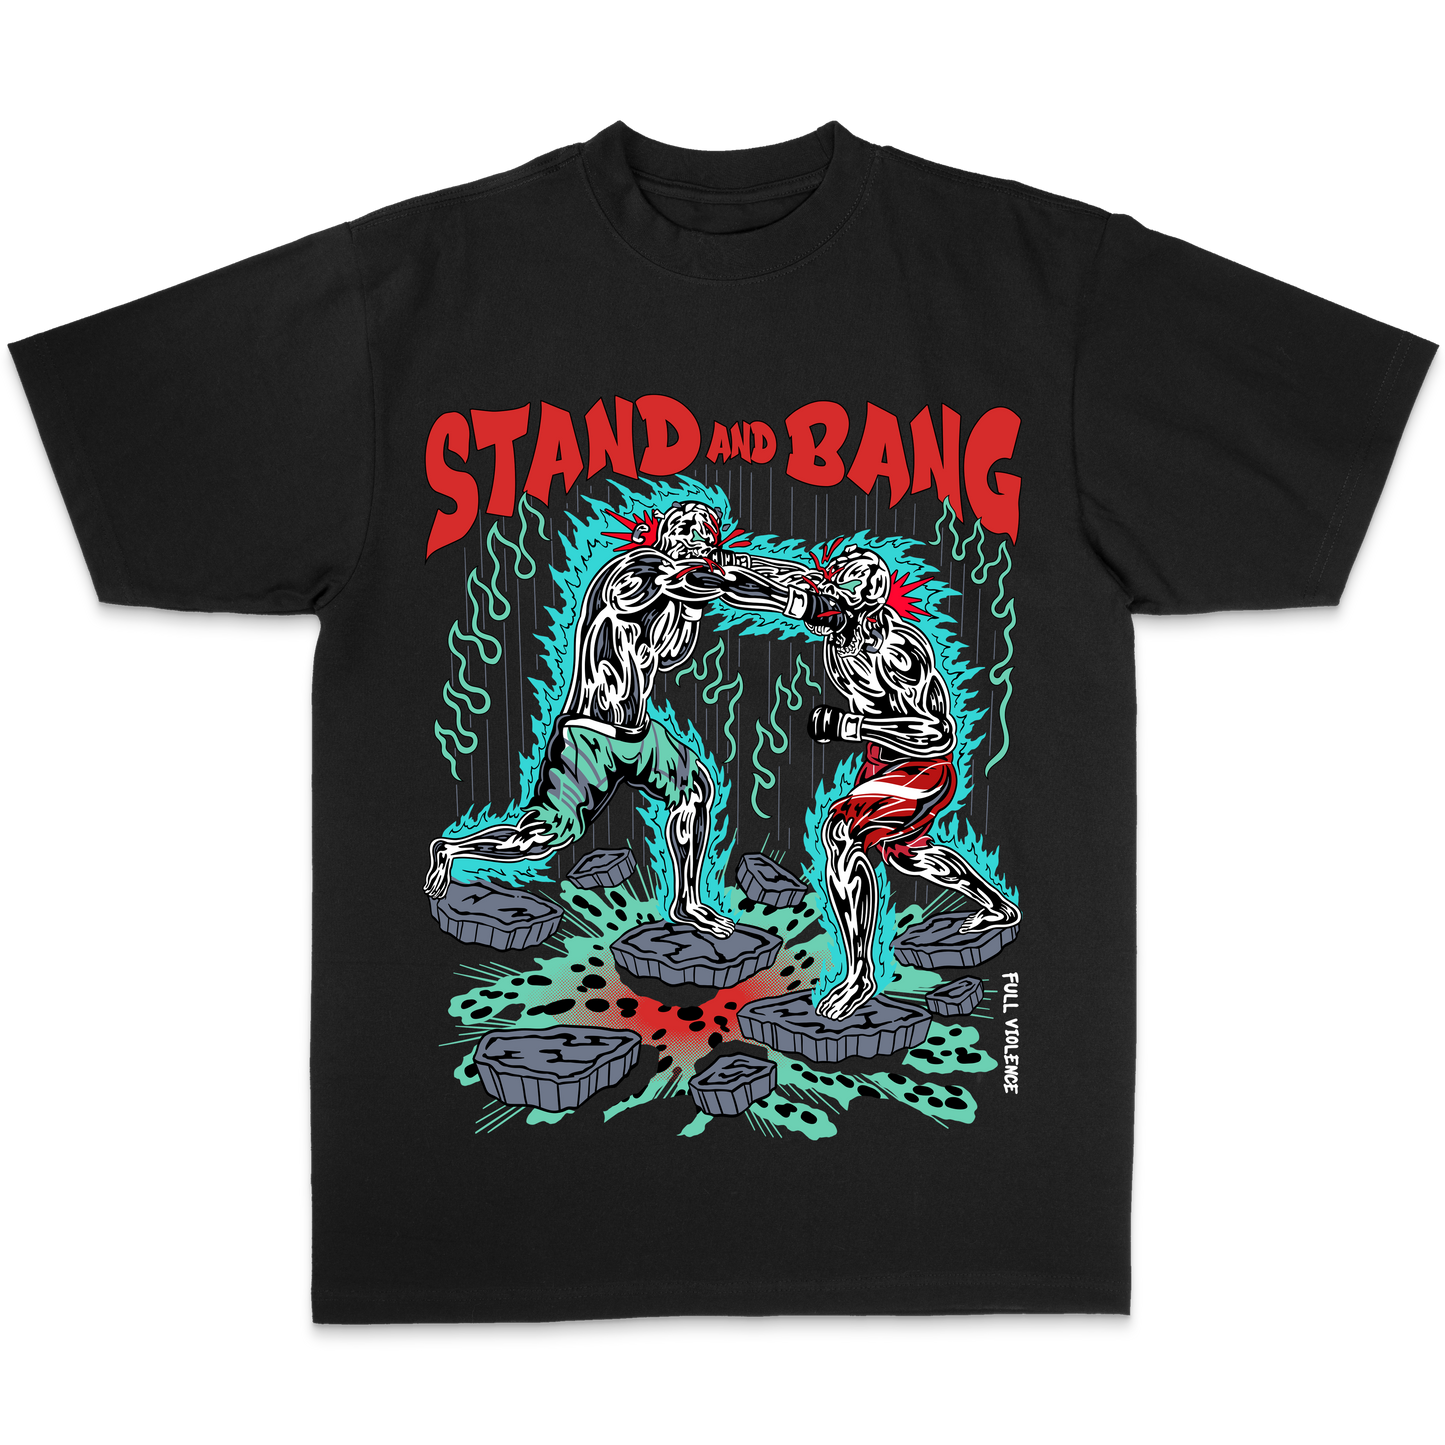 Stand and Bang "Classic" Tee in Black